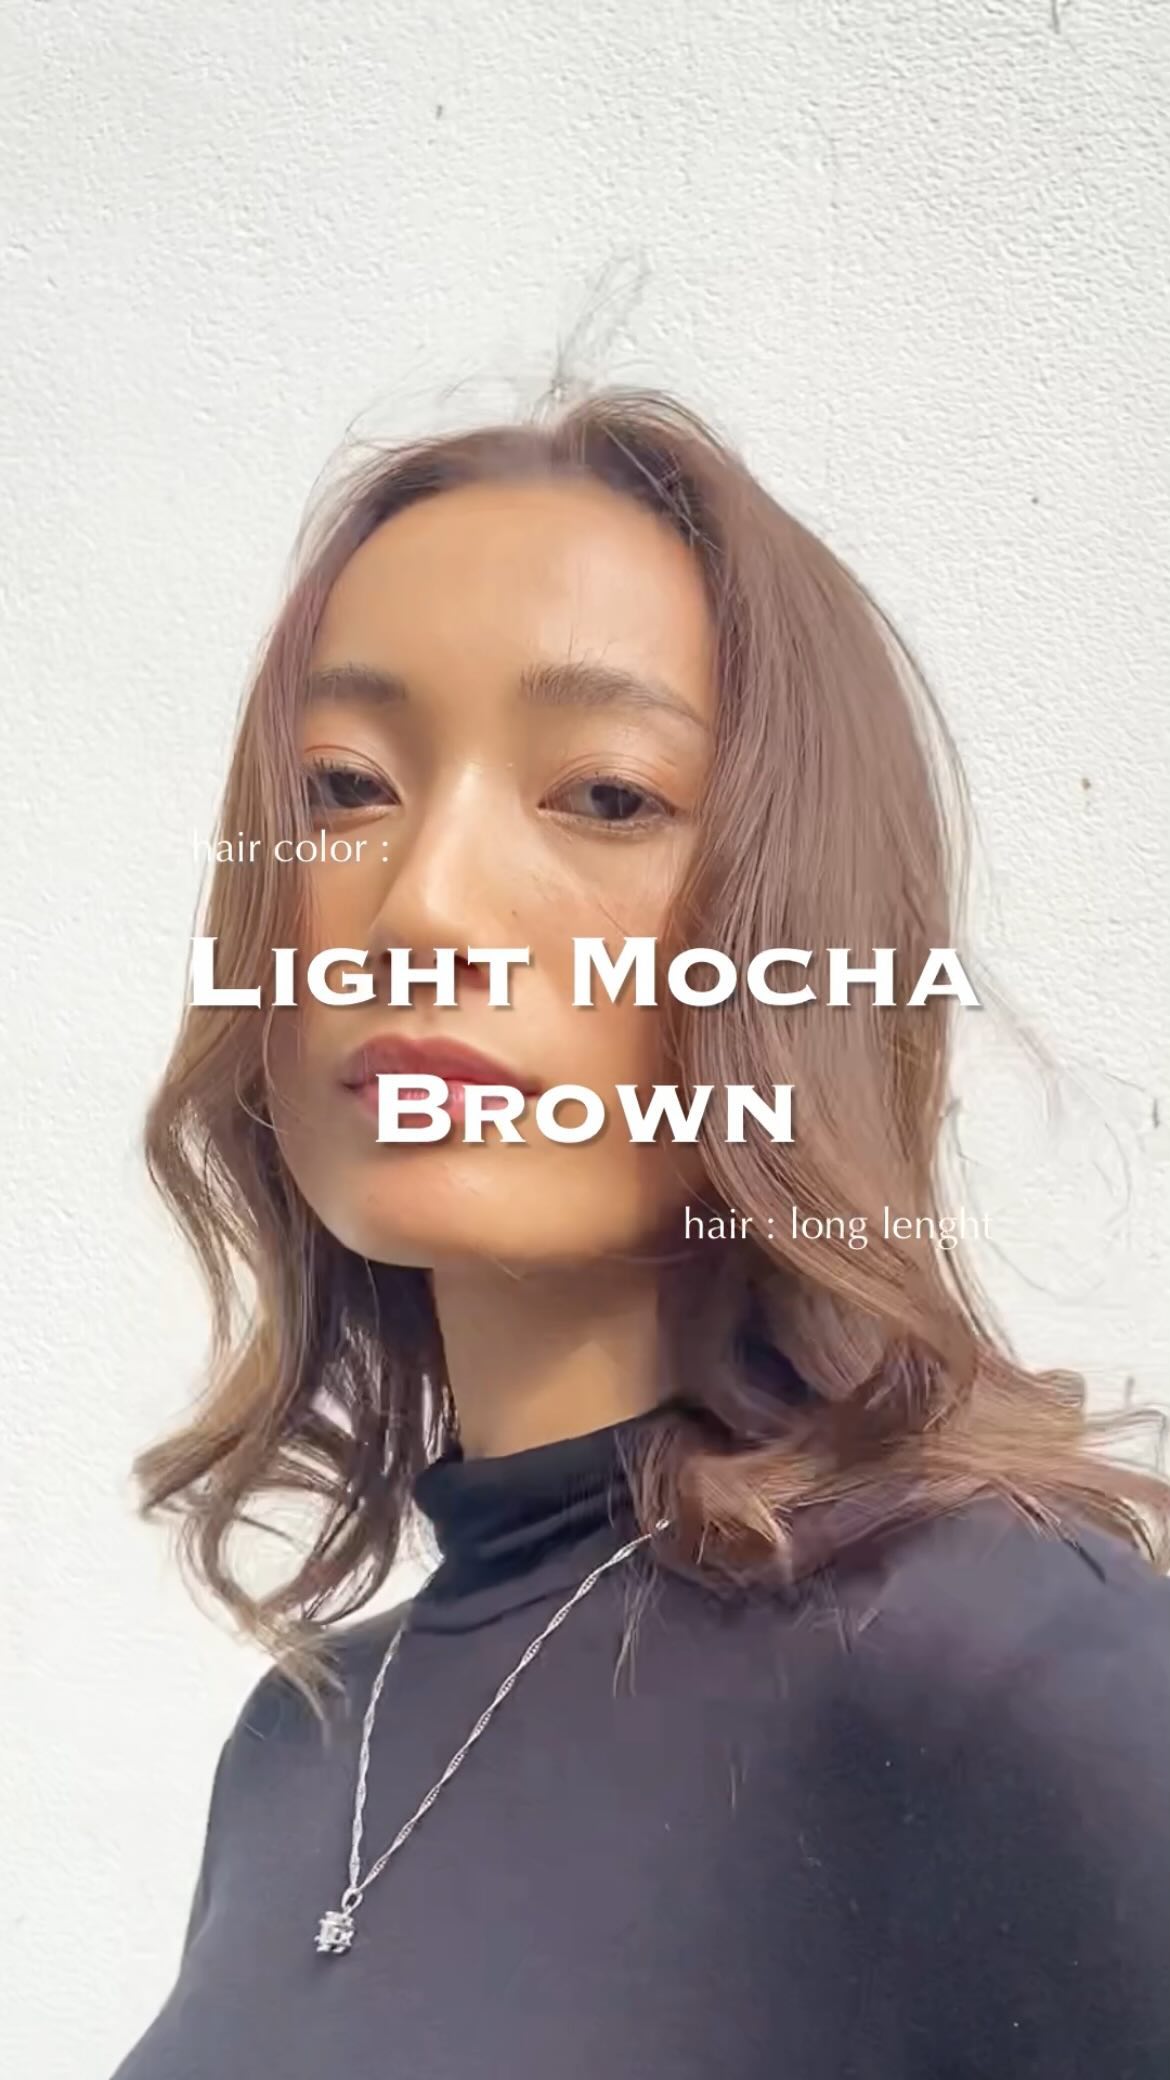 Style : Medium  Color : Light Mocha Brown  Top Brown Hair Color Idea For 2023
Naturally, it doesn't come as a surprise that Mocha brown is one of the most preferred hair colors for women. Why don't you try it too‍♀️
一口に言ってもブラウンはさまざまにあり、必ずひとりひとりの好みにマッチした髪色が見つかります。それらは年齢を問わず女性の美しさを引きだす鍵となると私たちは信じています️  Stylist.  ERI @bell_otonagami_eri  FB.  BELL Otonagami  salon  Tel.020003001
LINE.@skk6845h
Business hours:9AM〜9PM  Please feel free to contact us/お気軽にお問合せください️  #Bellotonagamisalon #ร้านทำผมญี่ปุ่น #バンコク美容室 #バンコク駐在 #バンコク在住